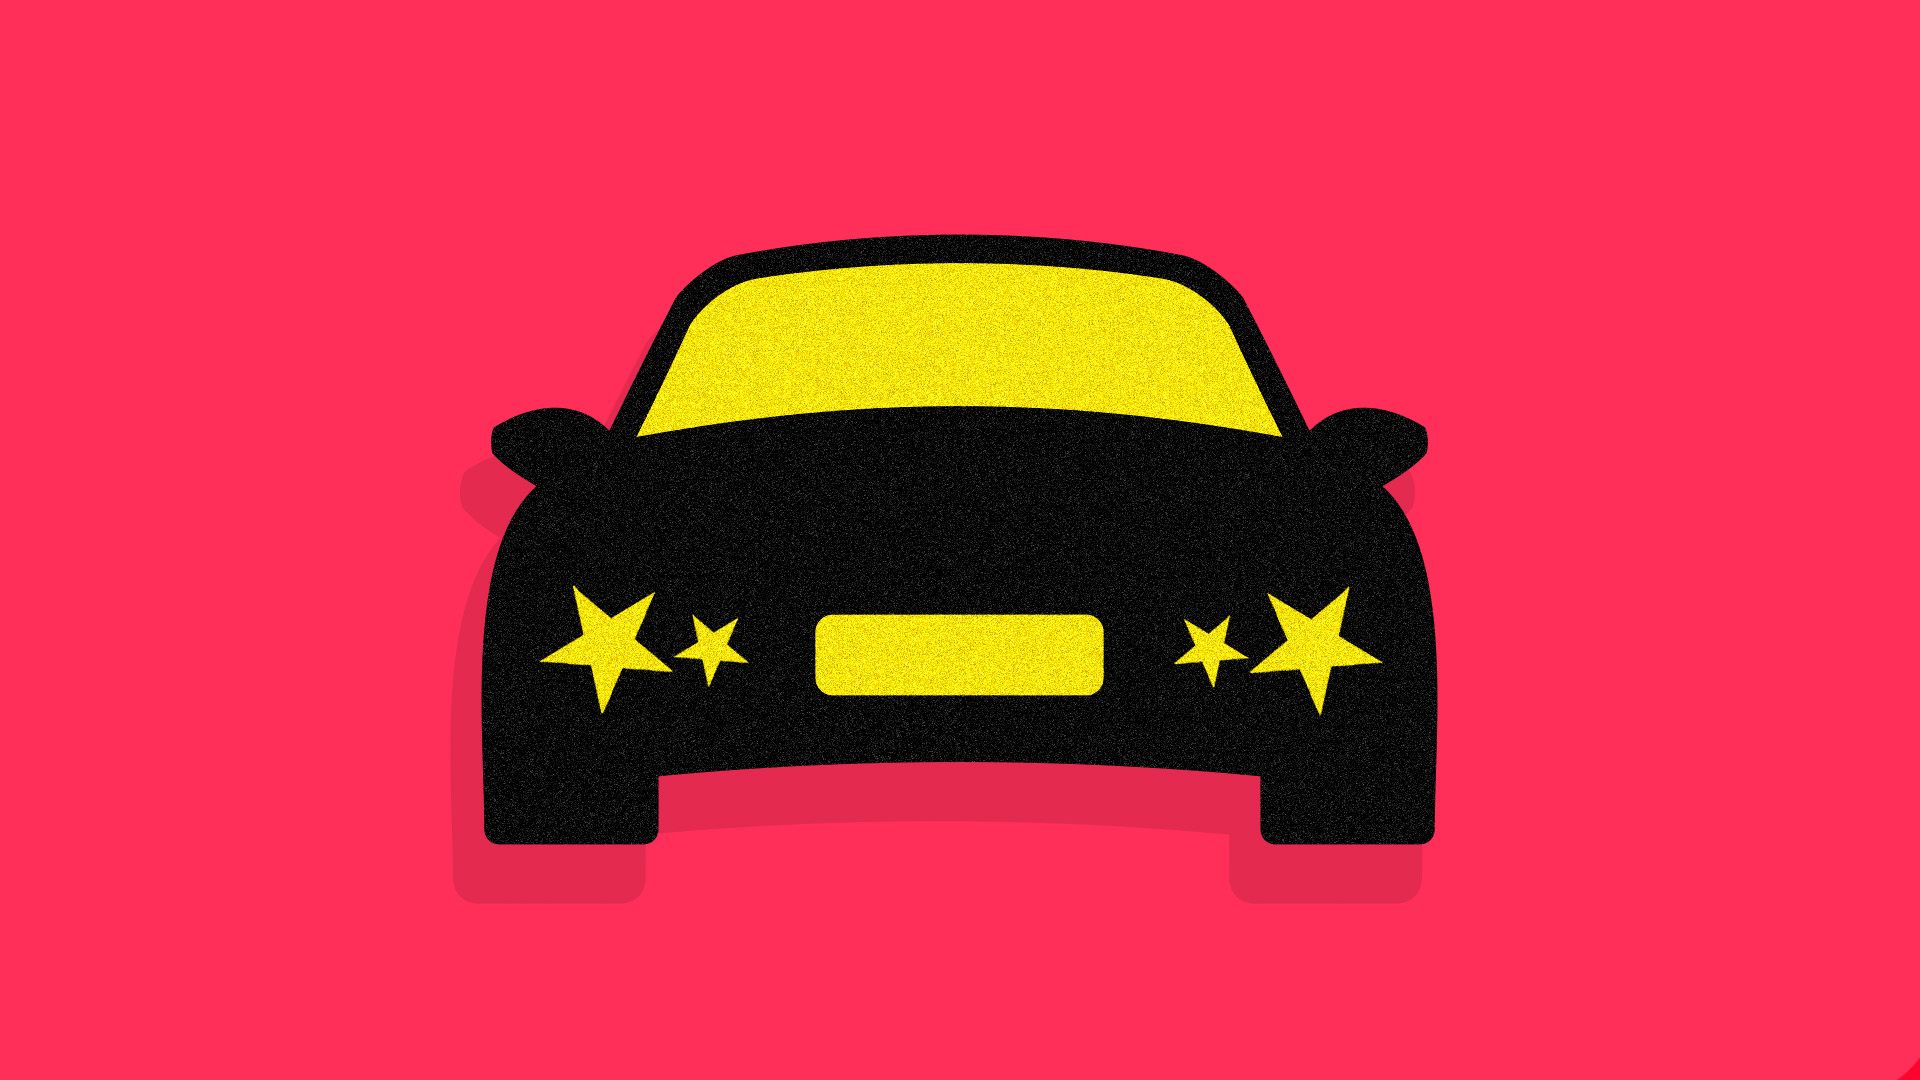 A black illustrated car with yellow stars for headlights against red backdrop (like Chinese flag)